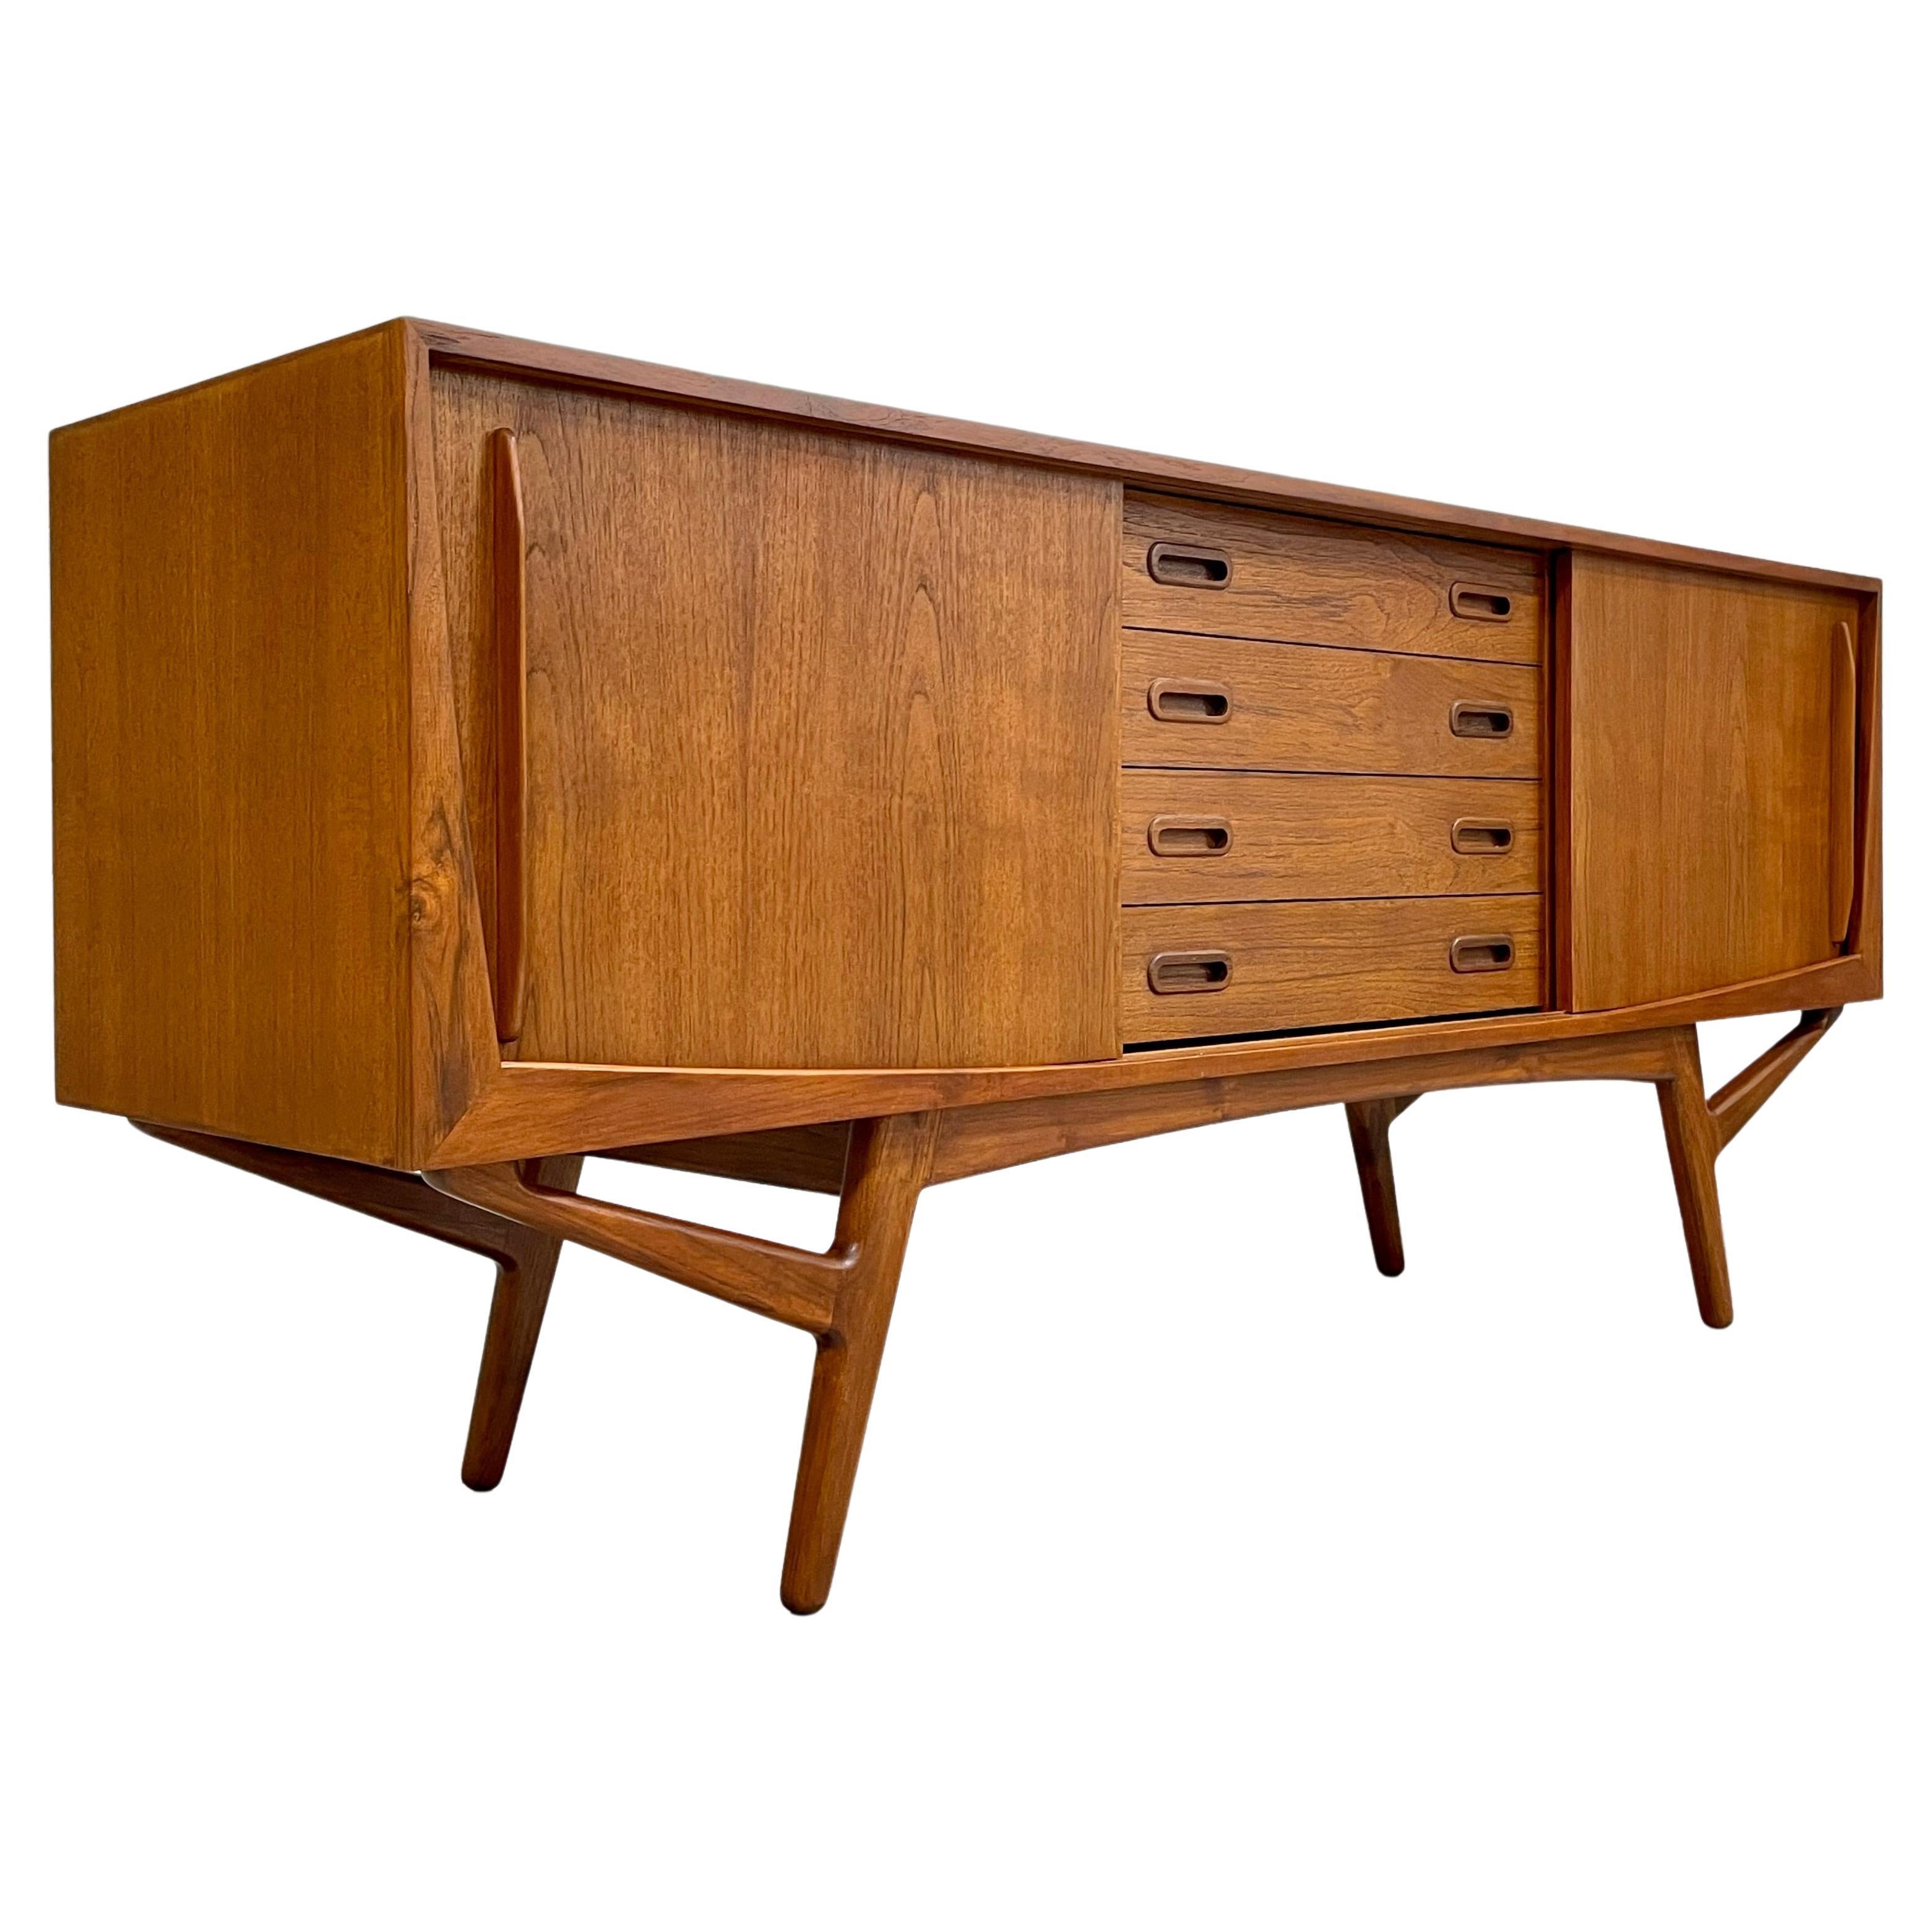 Jaw-dropping Mid-Century Modern styled credenza / Media Stand featuring stunning 